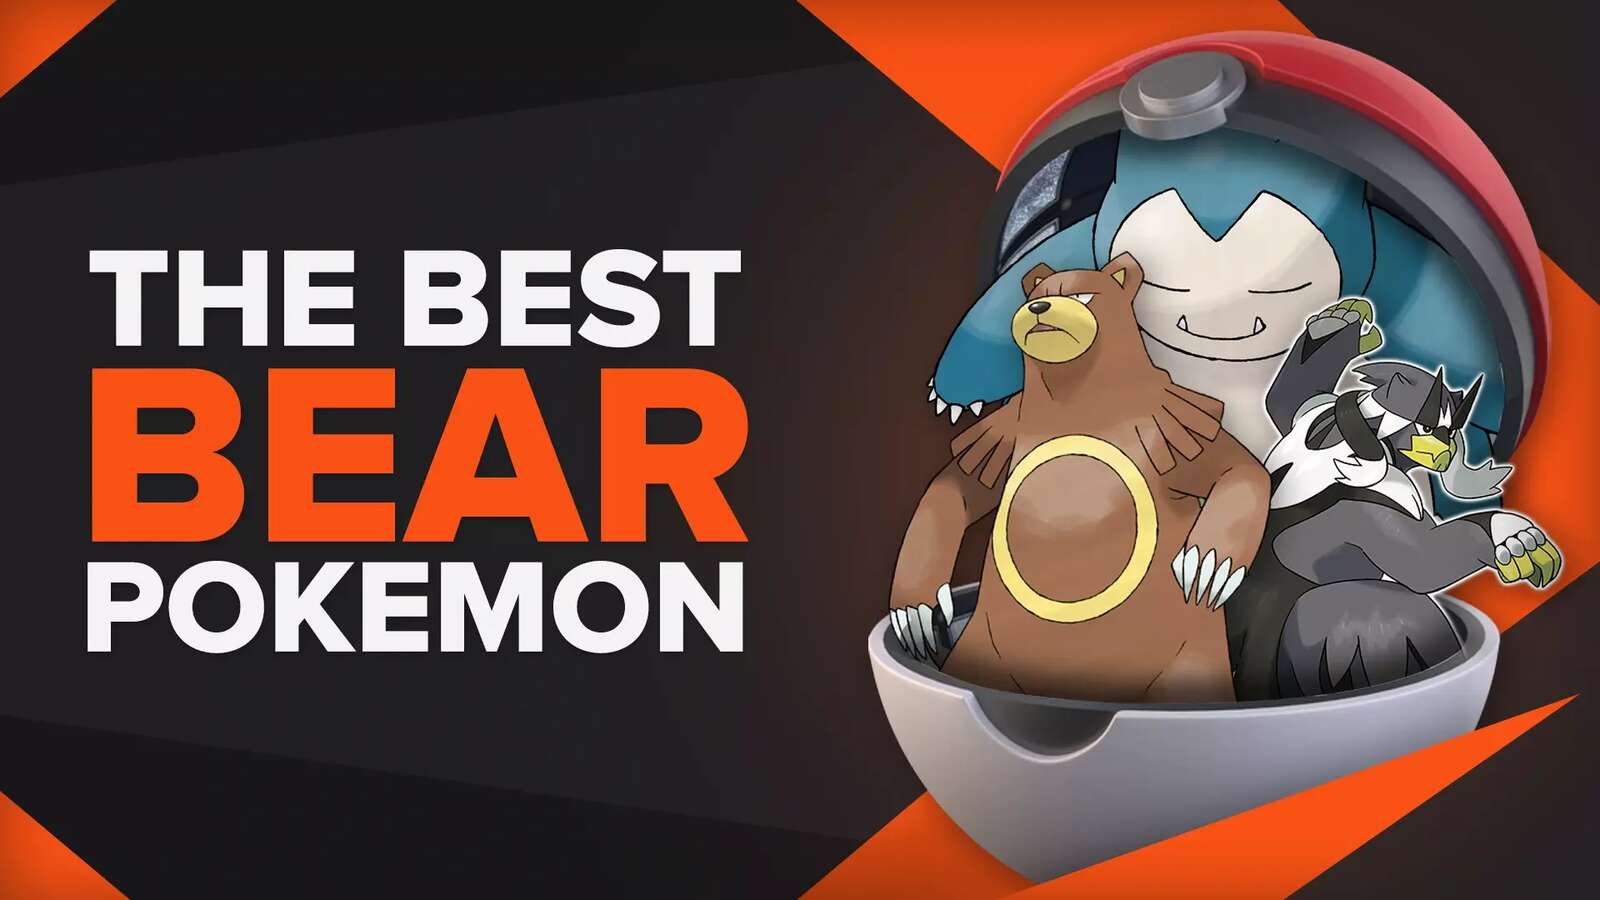 The 10 Best Bear Pokémon – Ranked from Best to Worst!